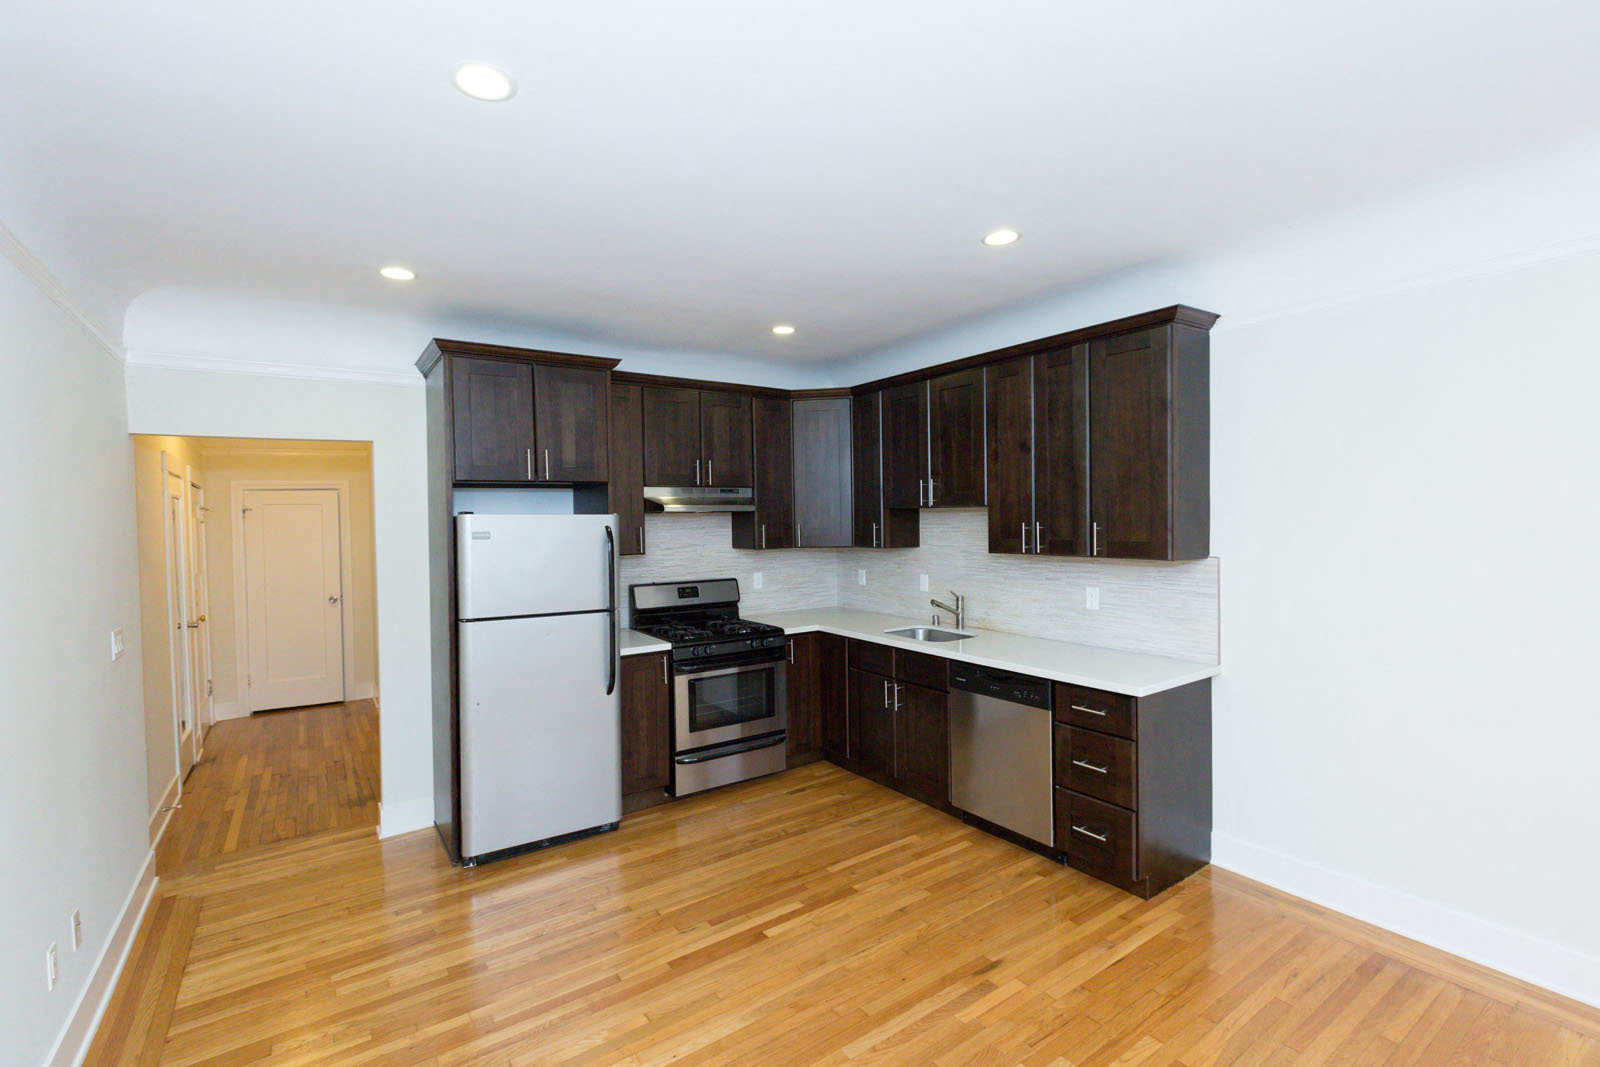 466 14th Street #8 Gallery Image #2